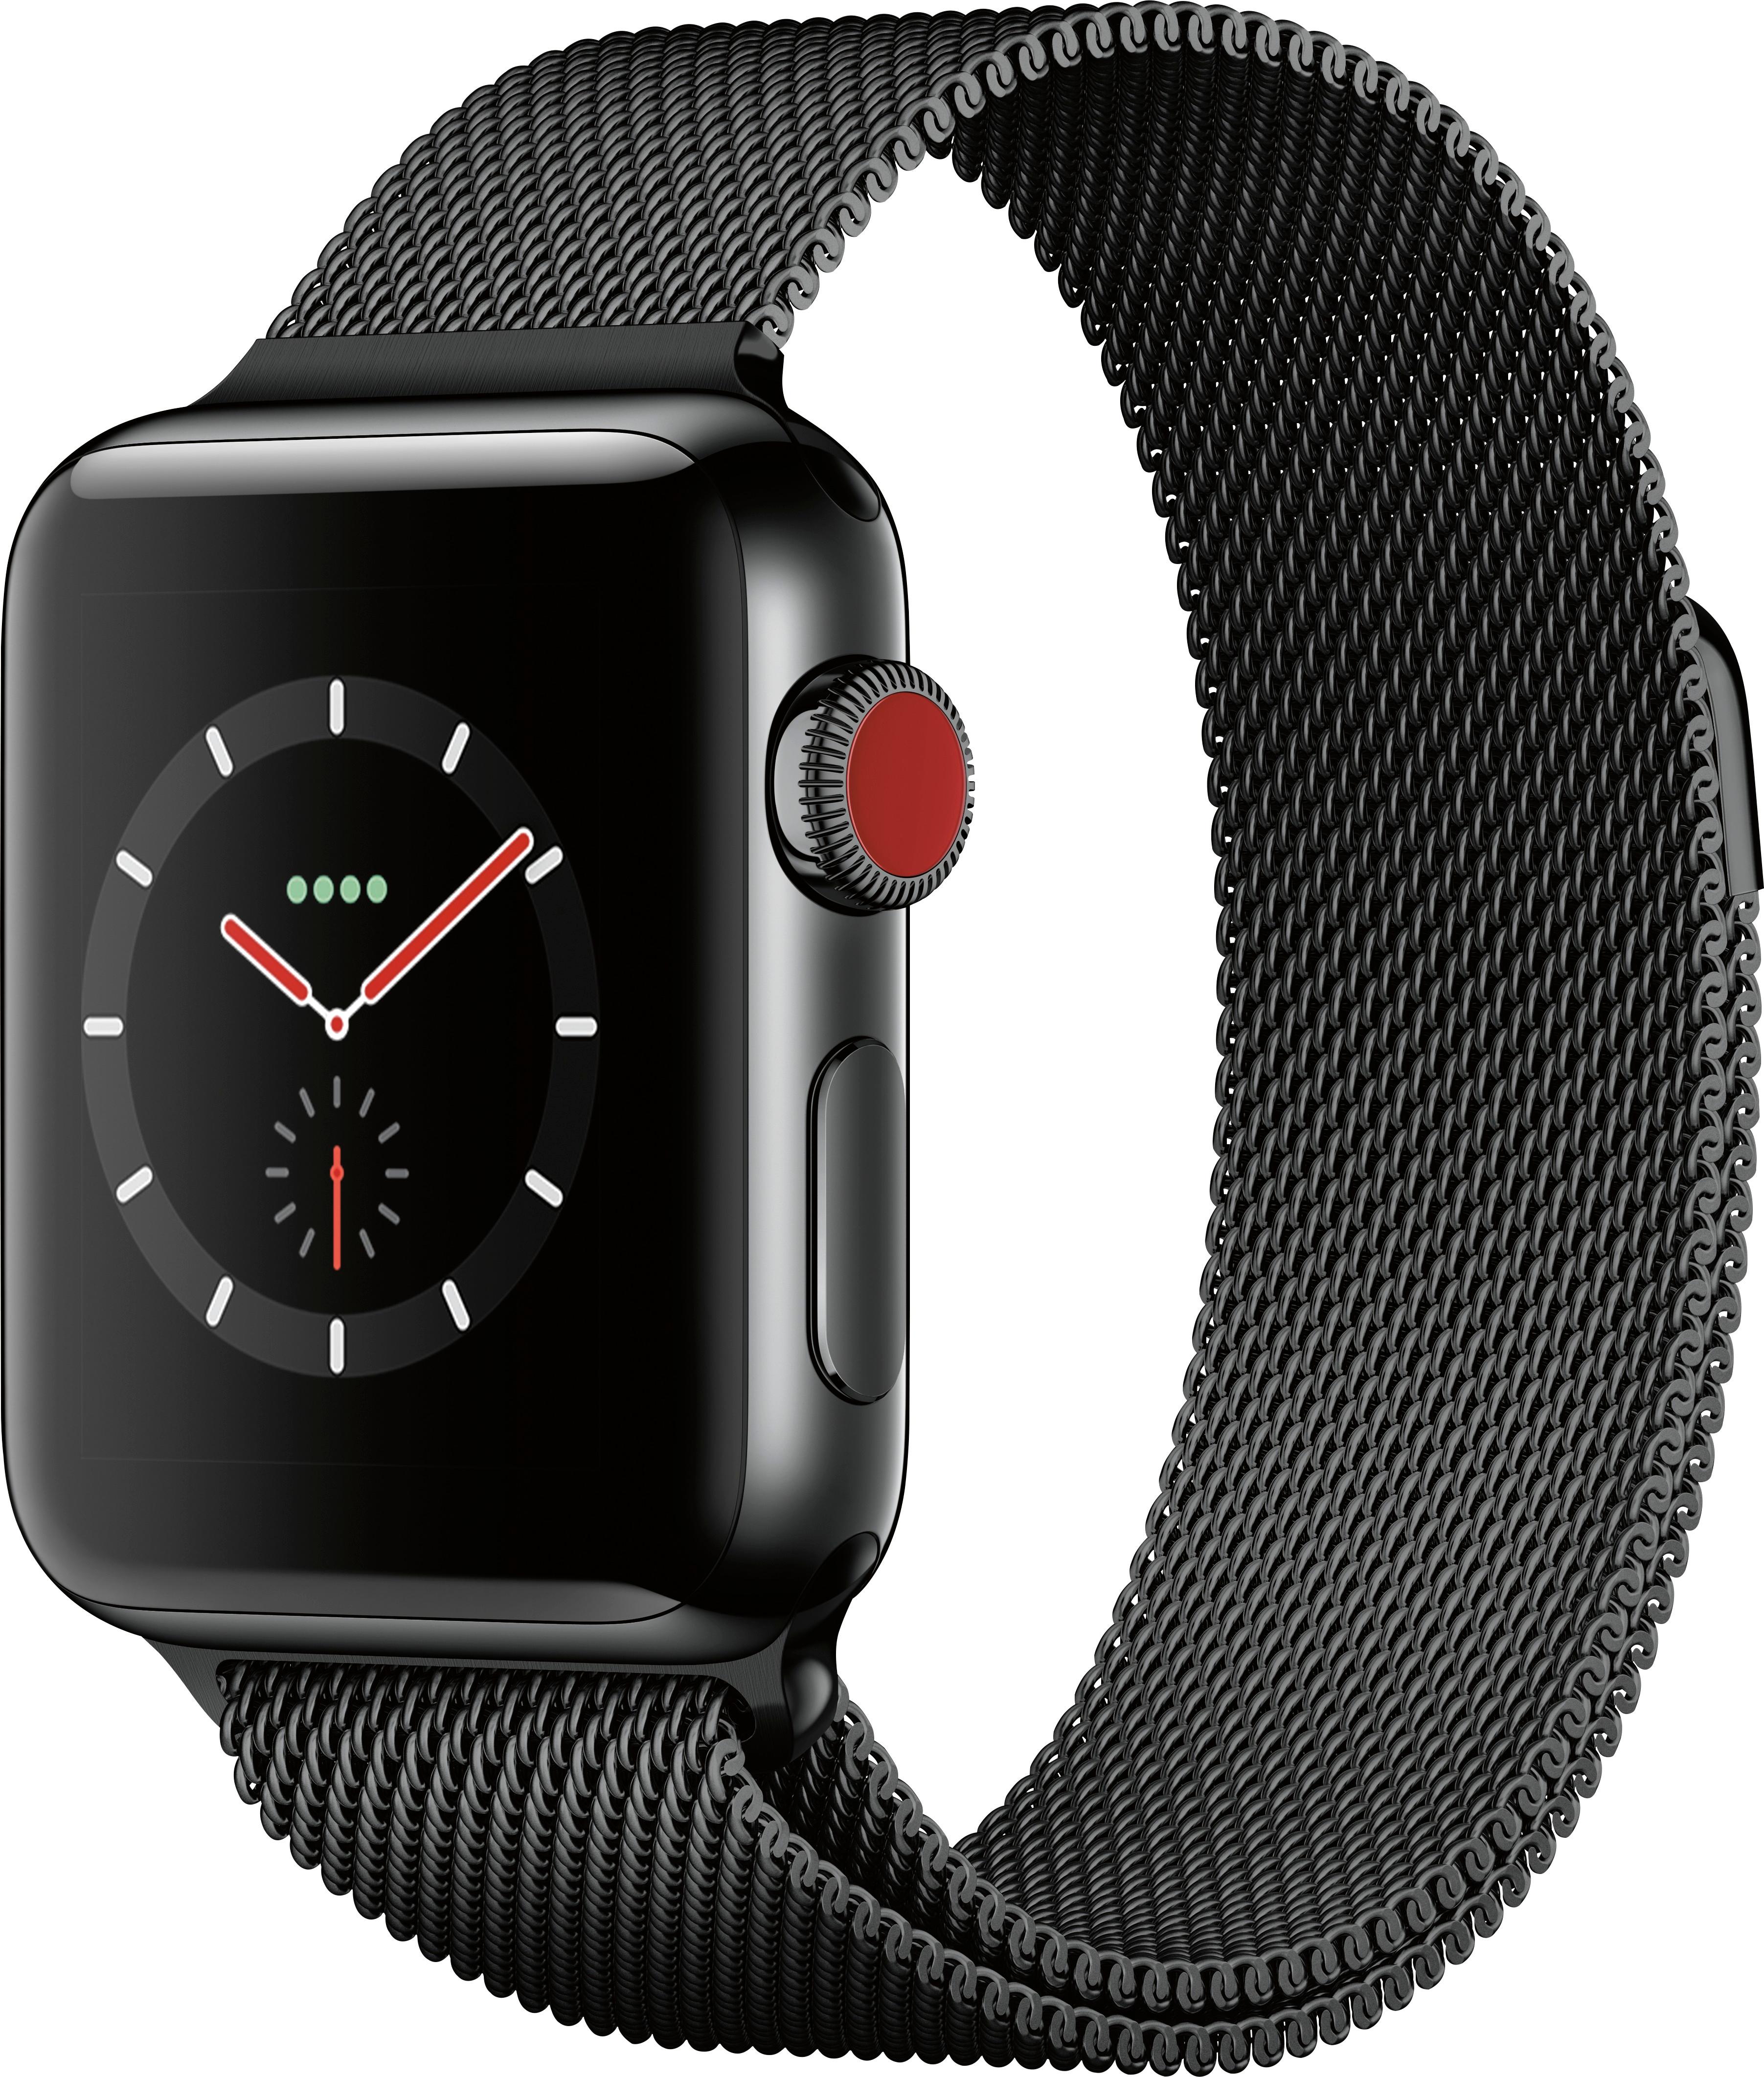 Angle View: Apple Watch Series 3 (GPS + Cellular) 38mm Space Black Stainless Steel Case with Space Black Milanese Loop - Space Black Stainless Steel (AT&T)